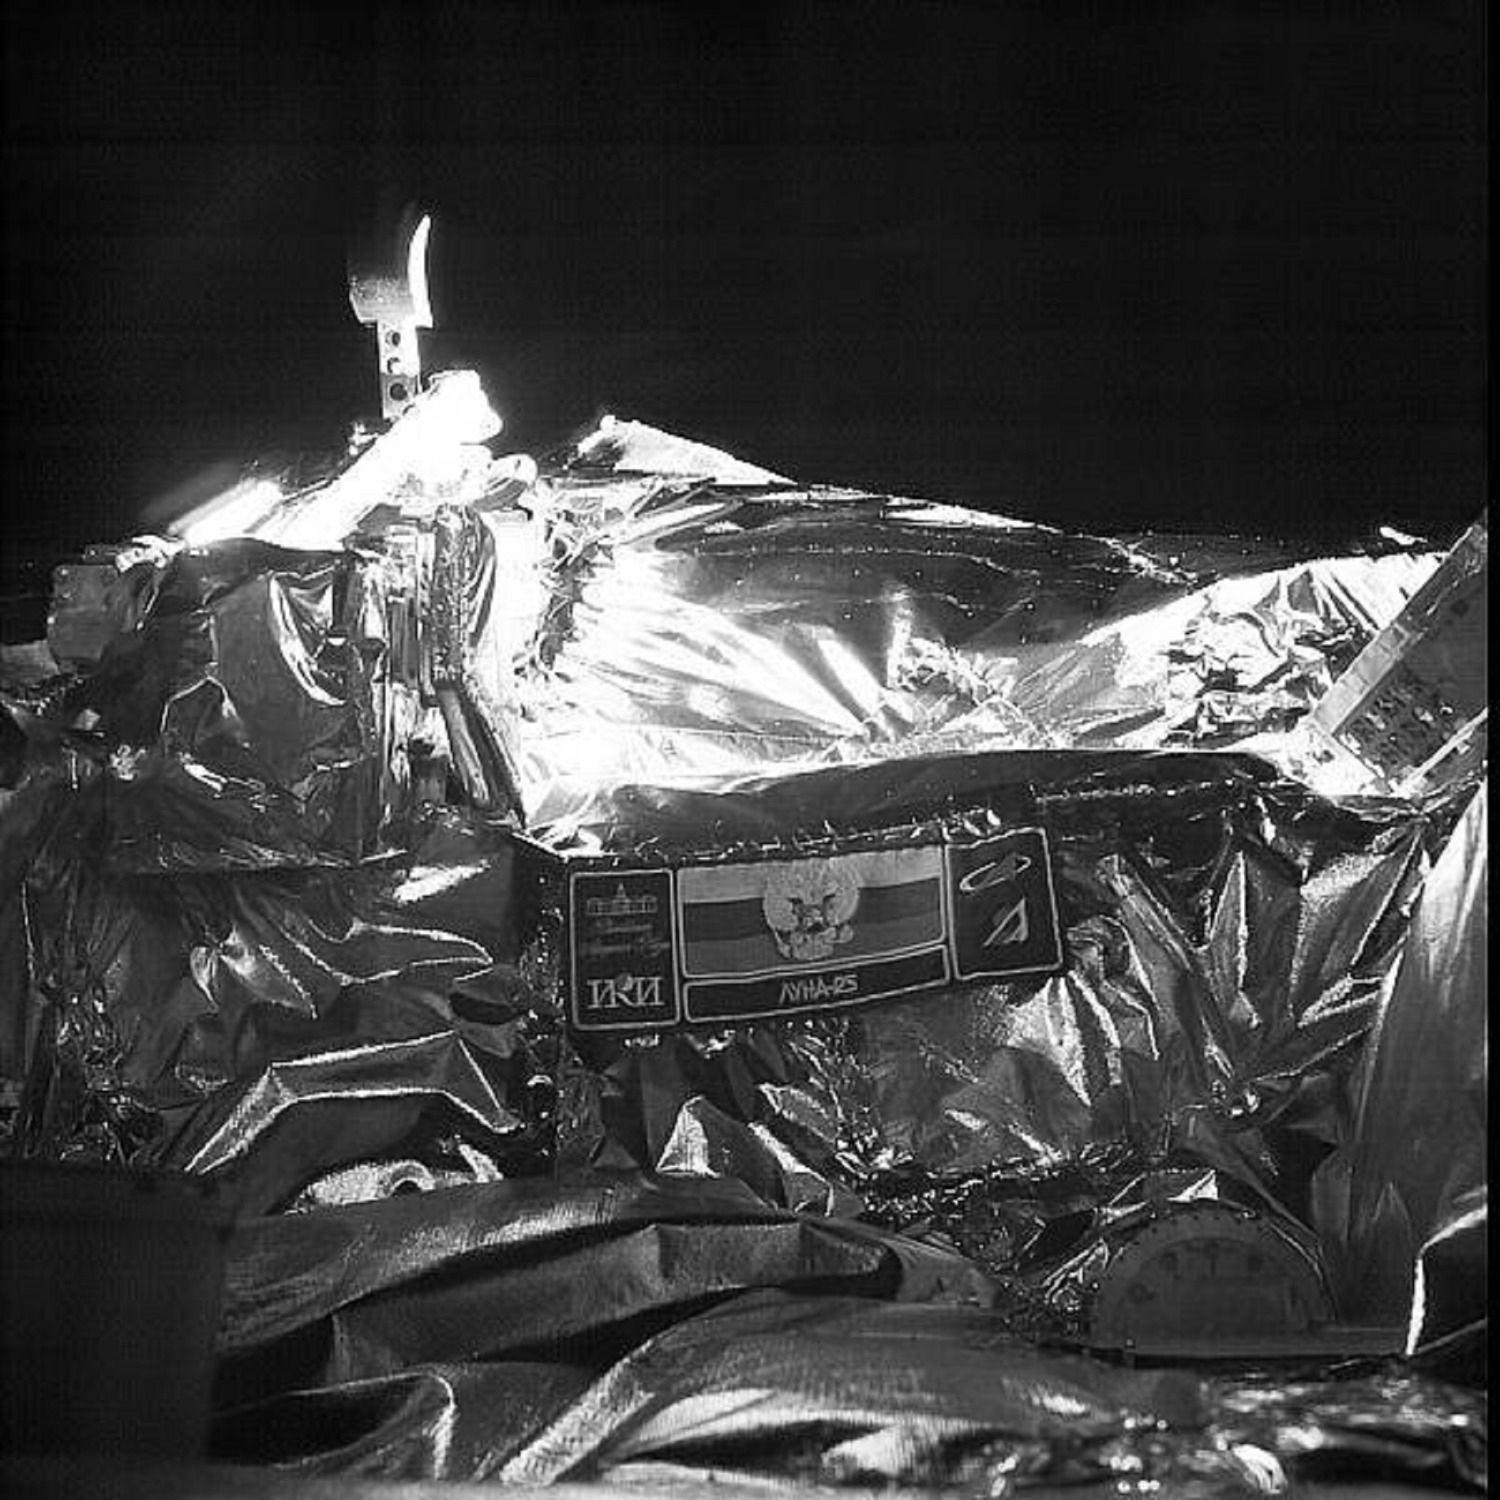 "Luna-25" transmitted the first pictures from space